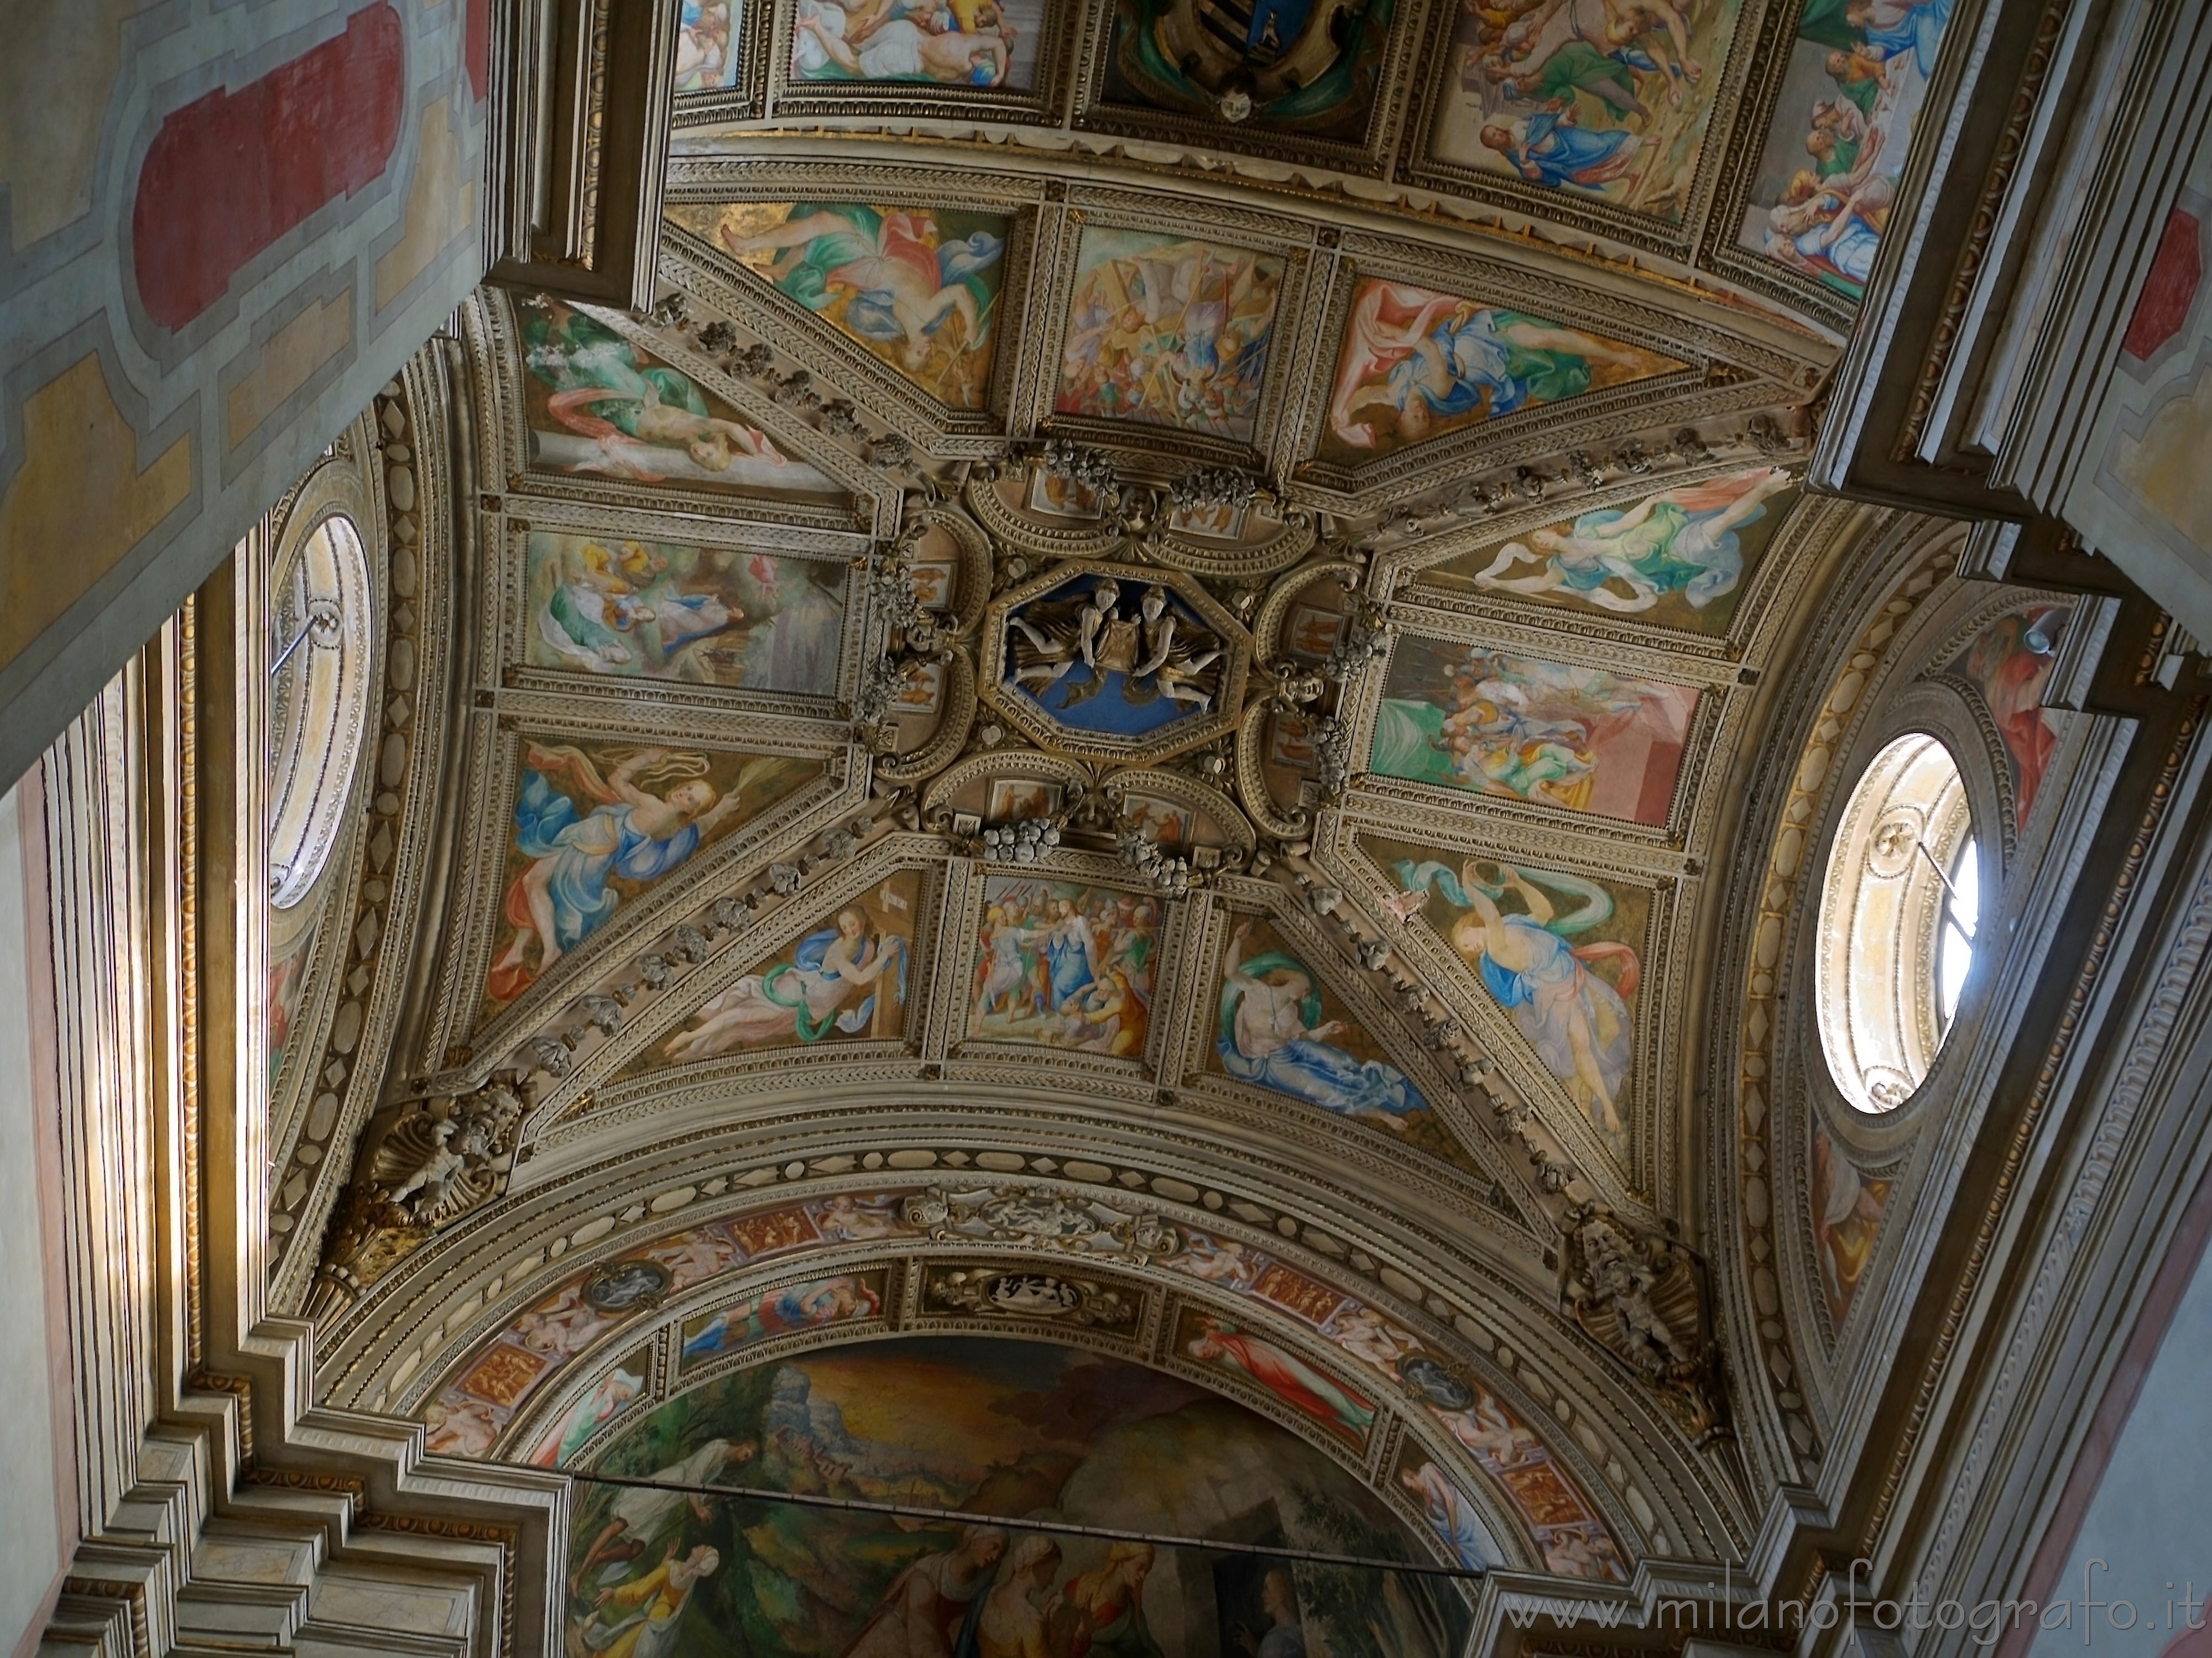 Milan (Italy): Ceiling of one of the lateral chapels - Milan (Italy)